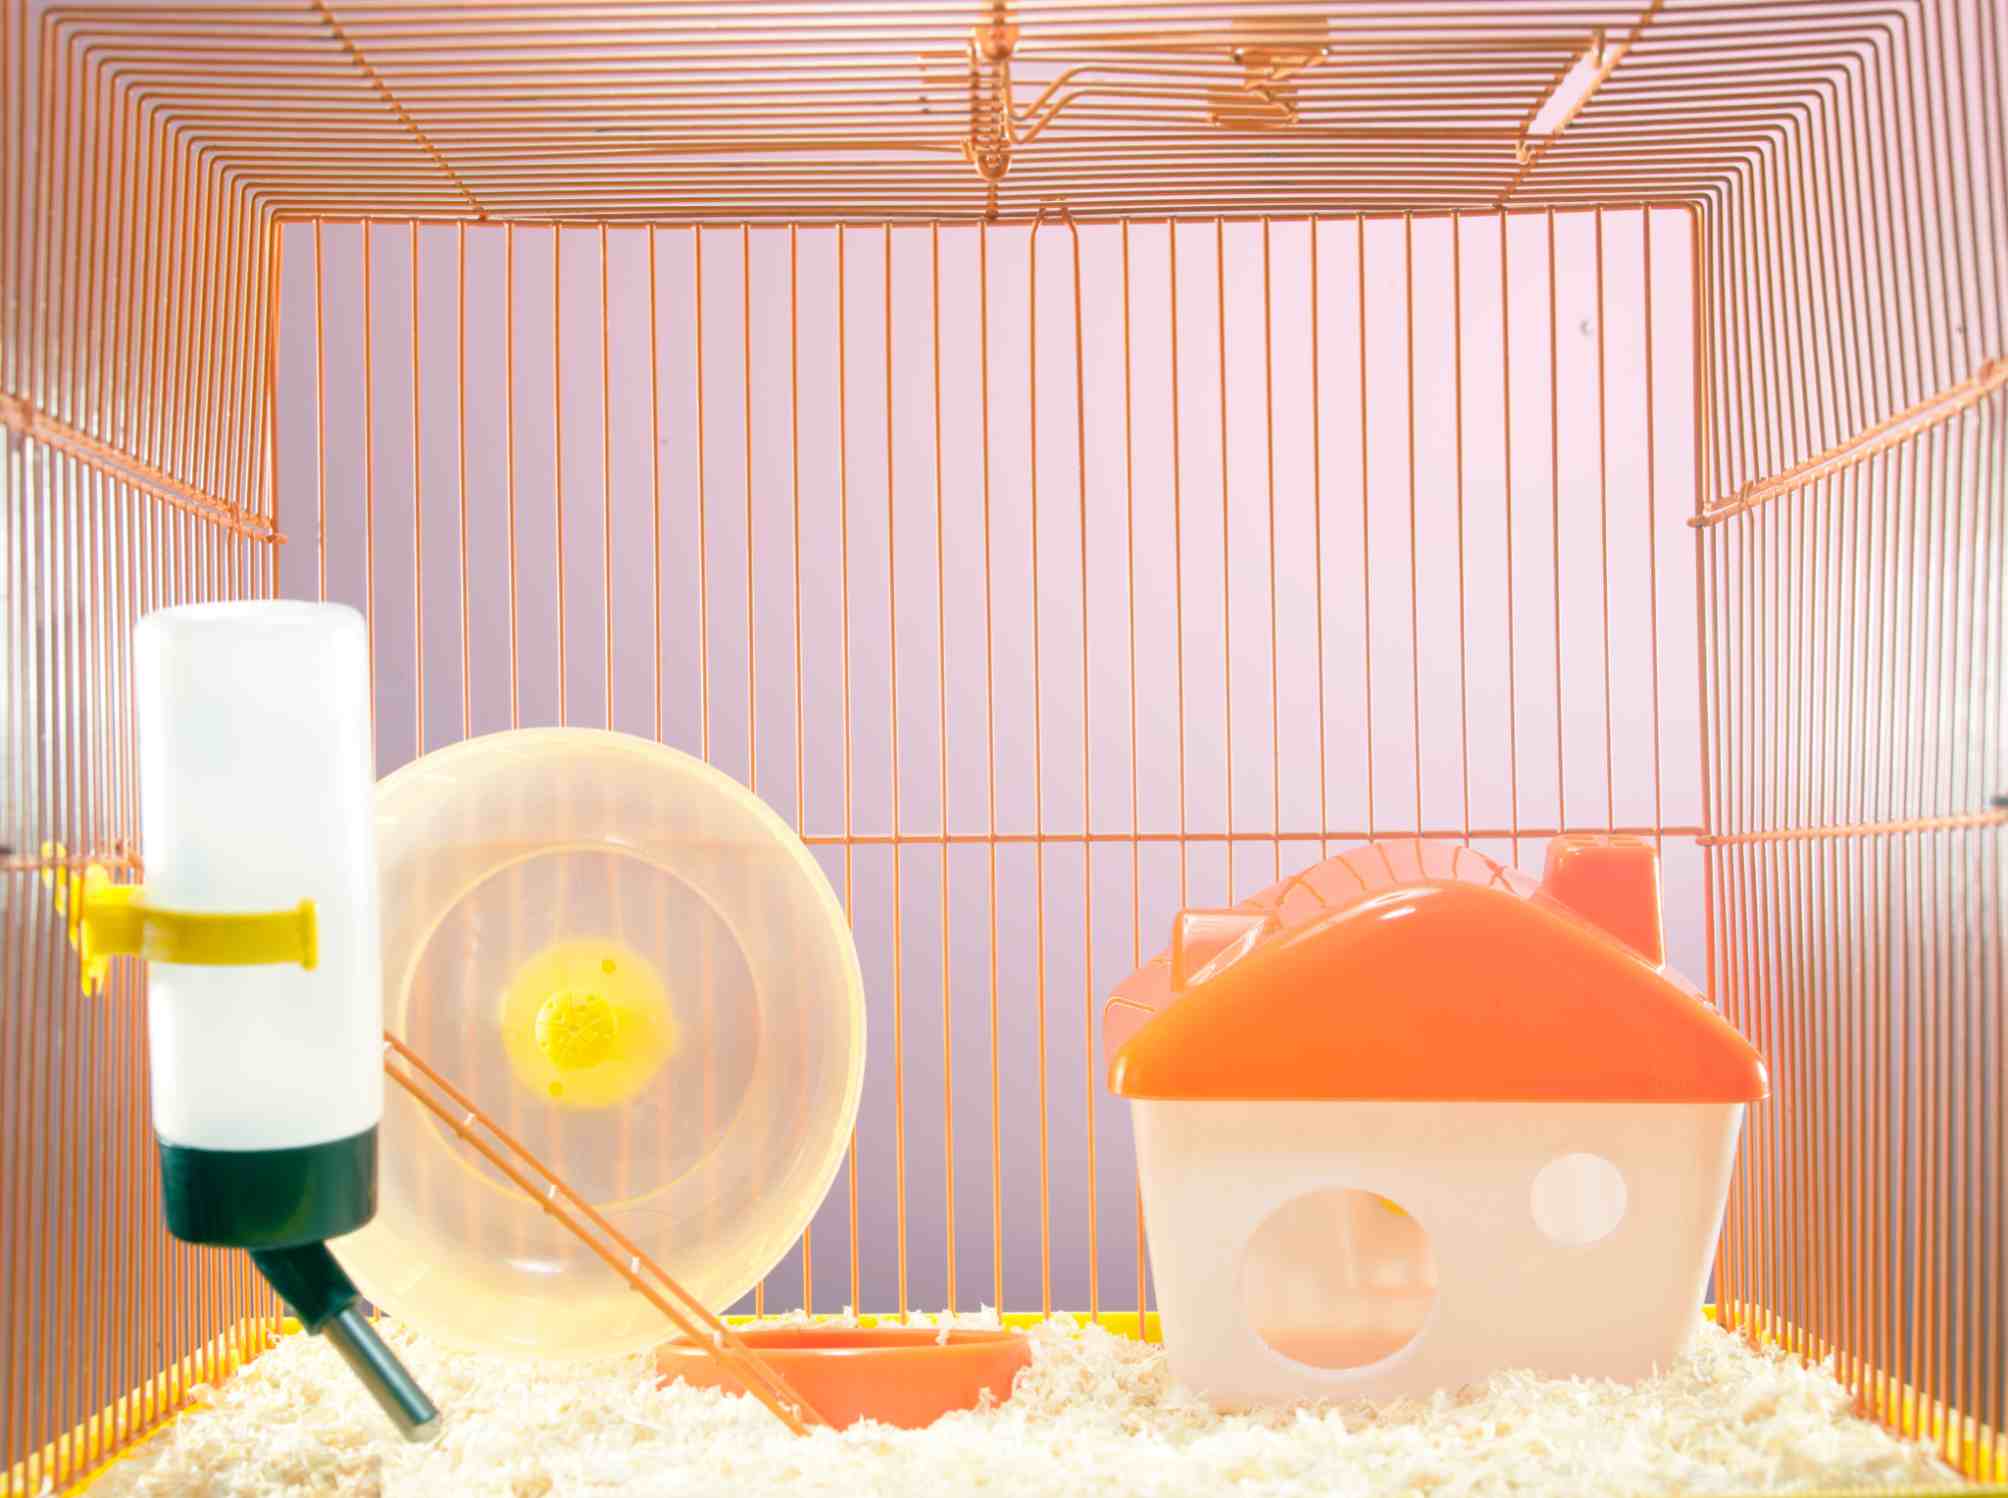 A fully equipped hamster cage